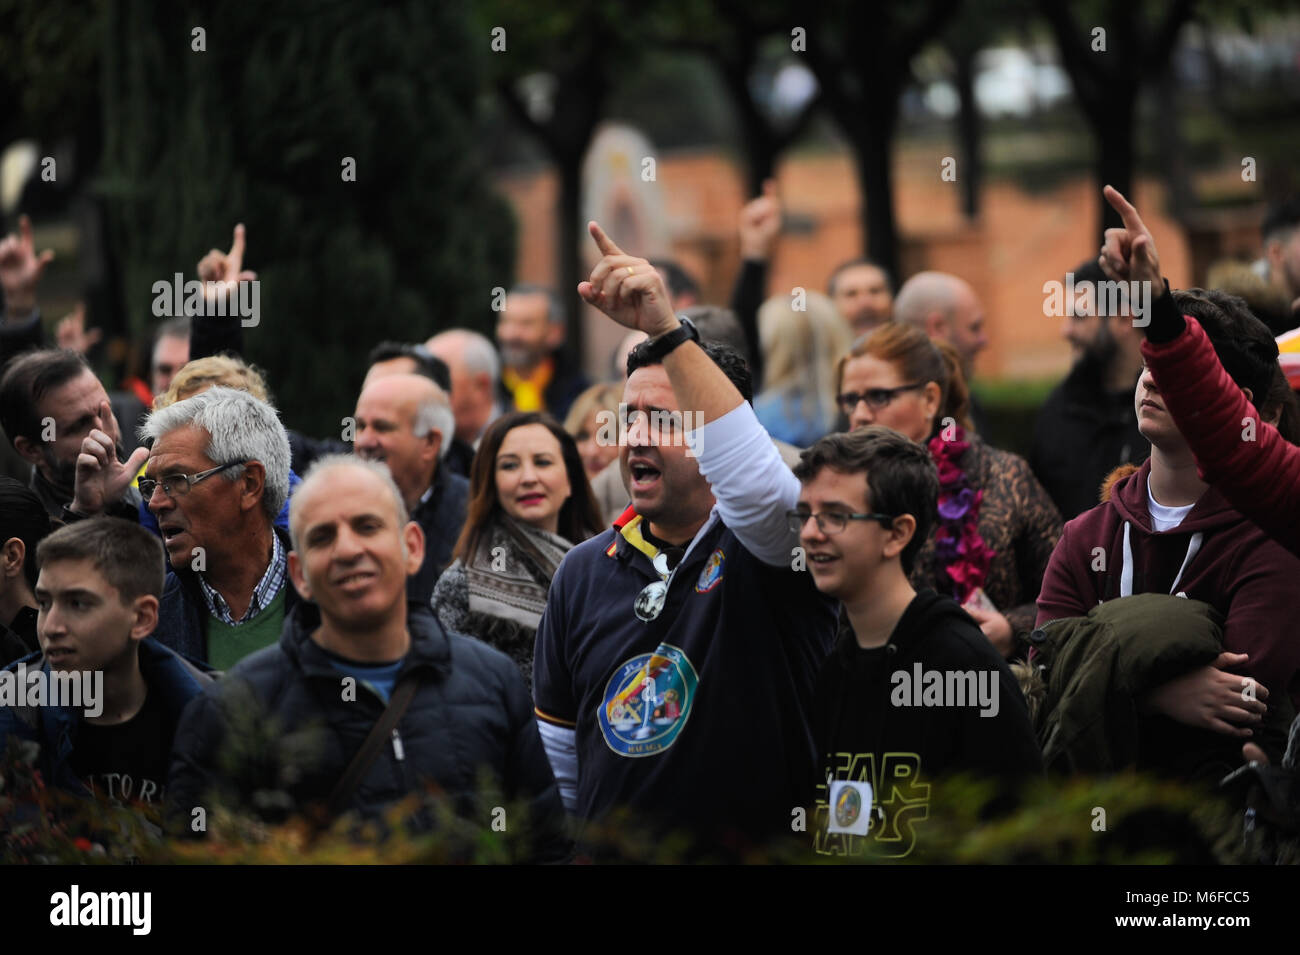 Malaga, Spain. 3rd Mar, 2018. A man shouting slogans as he takes part in a demonstration to demand equal salaries and working conditions for all police force in downtown MÃ¡laga. The association named 'Jusapol', whom include members of Spanish Civil Guards and Spanish National Police, claim to Spanish Government the equal salaries and rights in comparison with the Catalan Mossos de Esquadra and the Basque Ertzaintza police forces. Credit: J MÃ‰RIDA 03032018 1-23.jpg/SOPA Images/ZUMA Wire/Alamy Live News Stock Photo